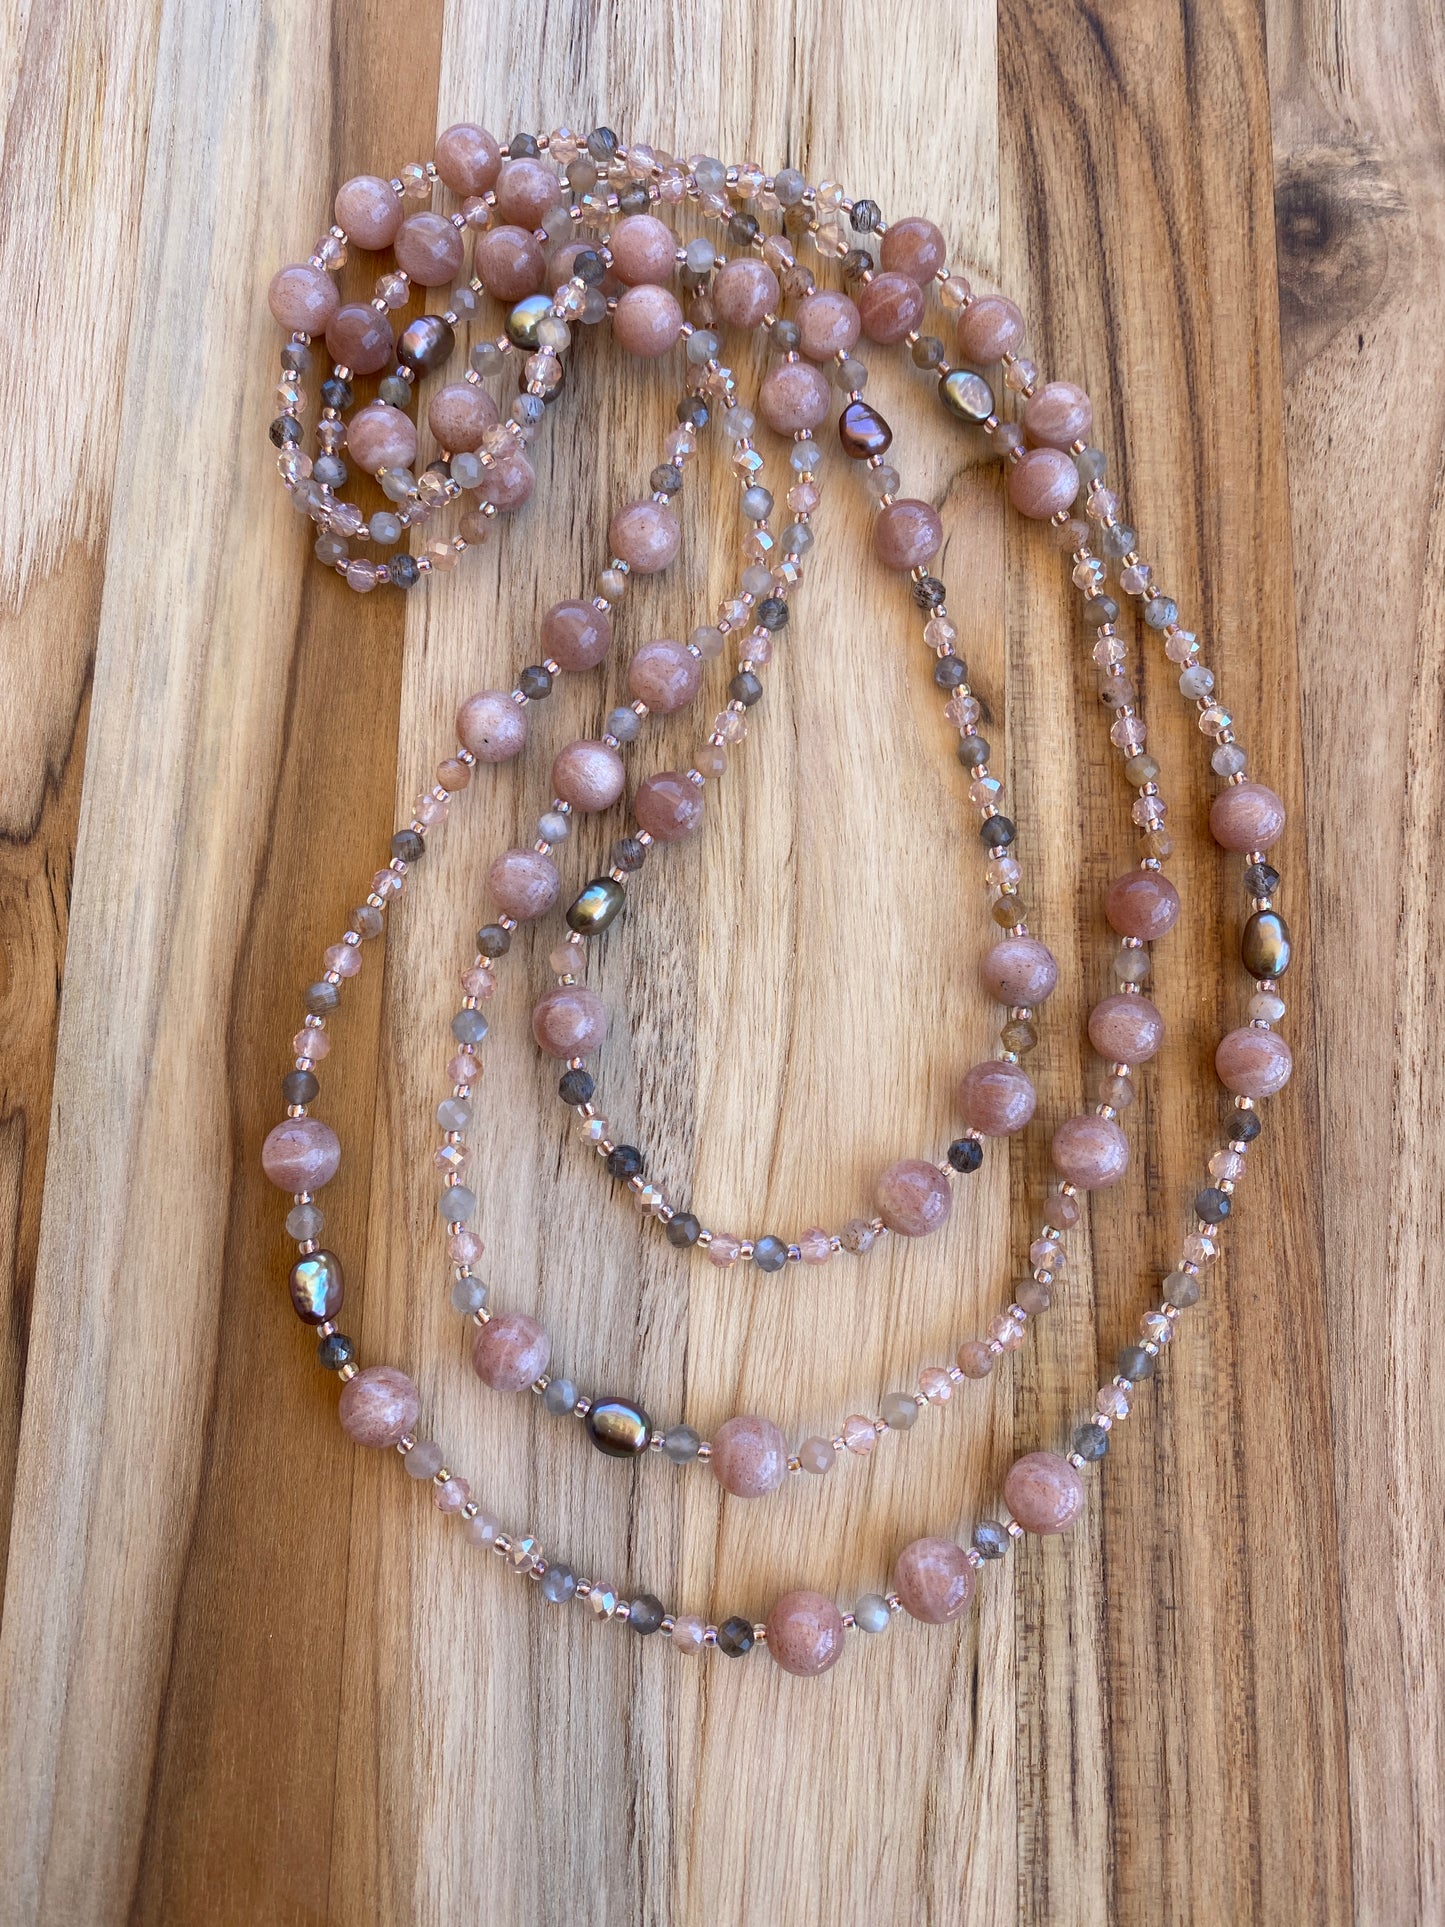 60" Extra Long Beaded Sunstone and Multi Colored Moonstone Necklace with Crystal Beads - My Urban Gems